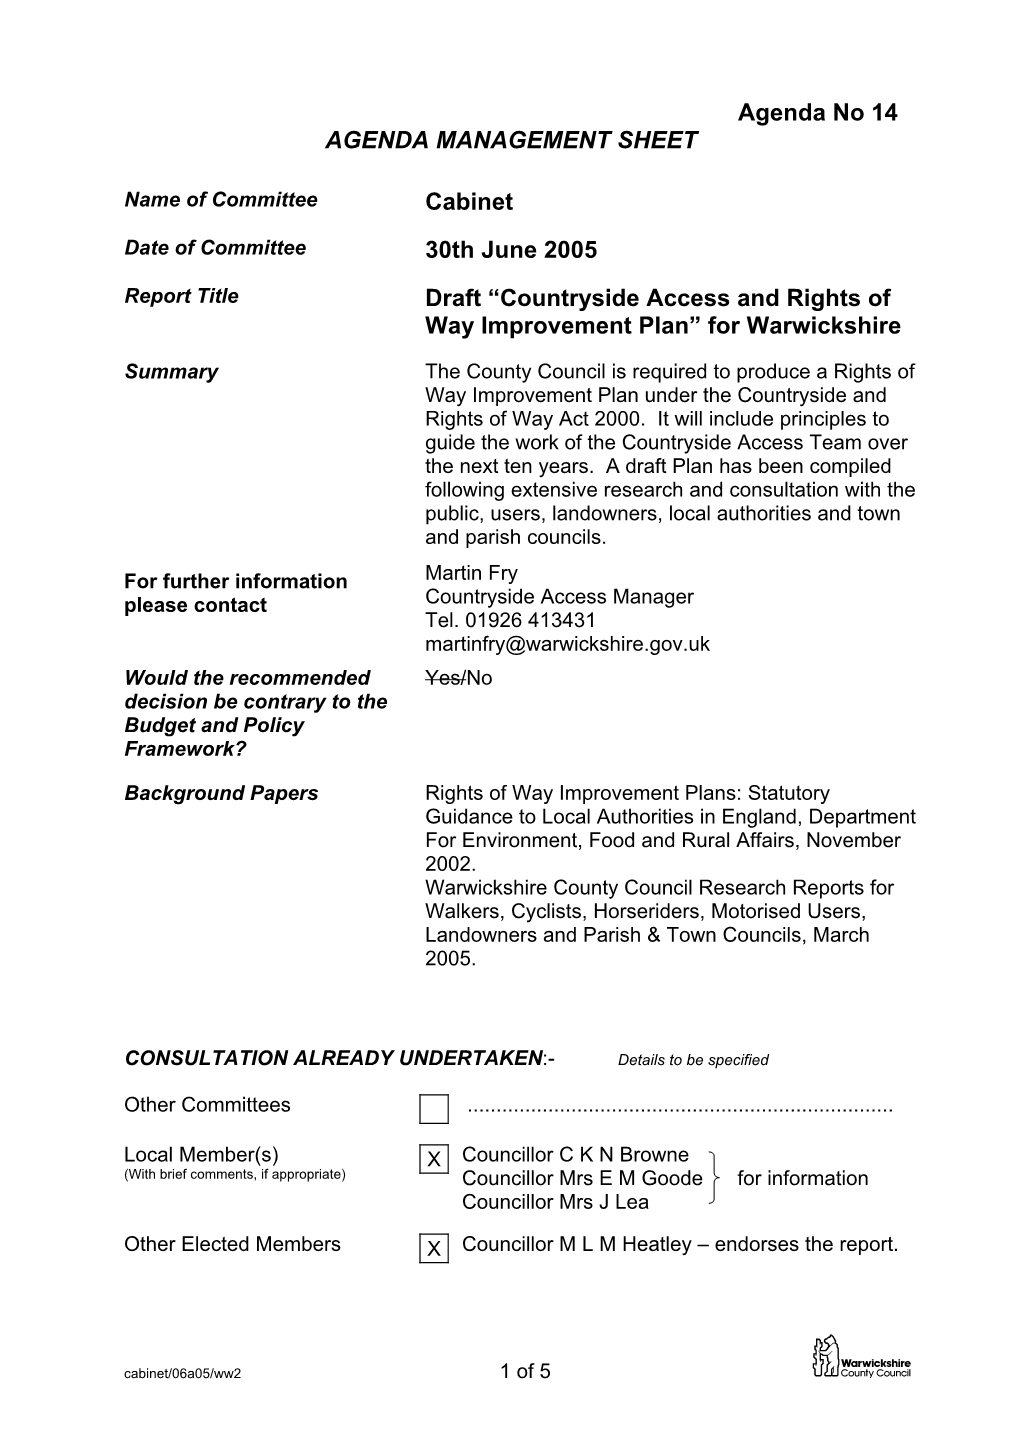 Agenda No 14 AGENDA MANAGEMENT SHEET Cabinet 30Th June 2005 Draft “Countryside Access and Rights of Way Improvement Plan” Fo